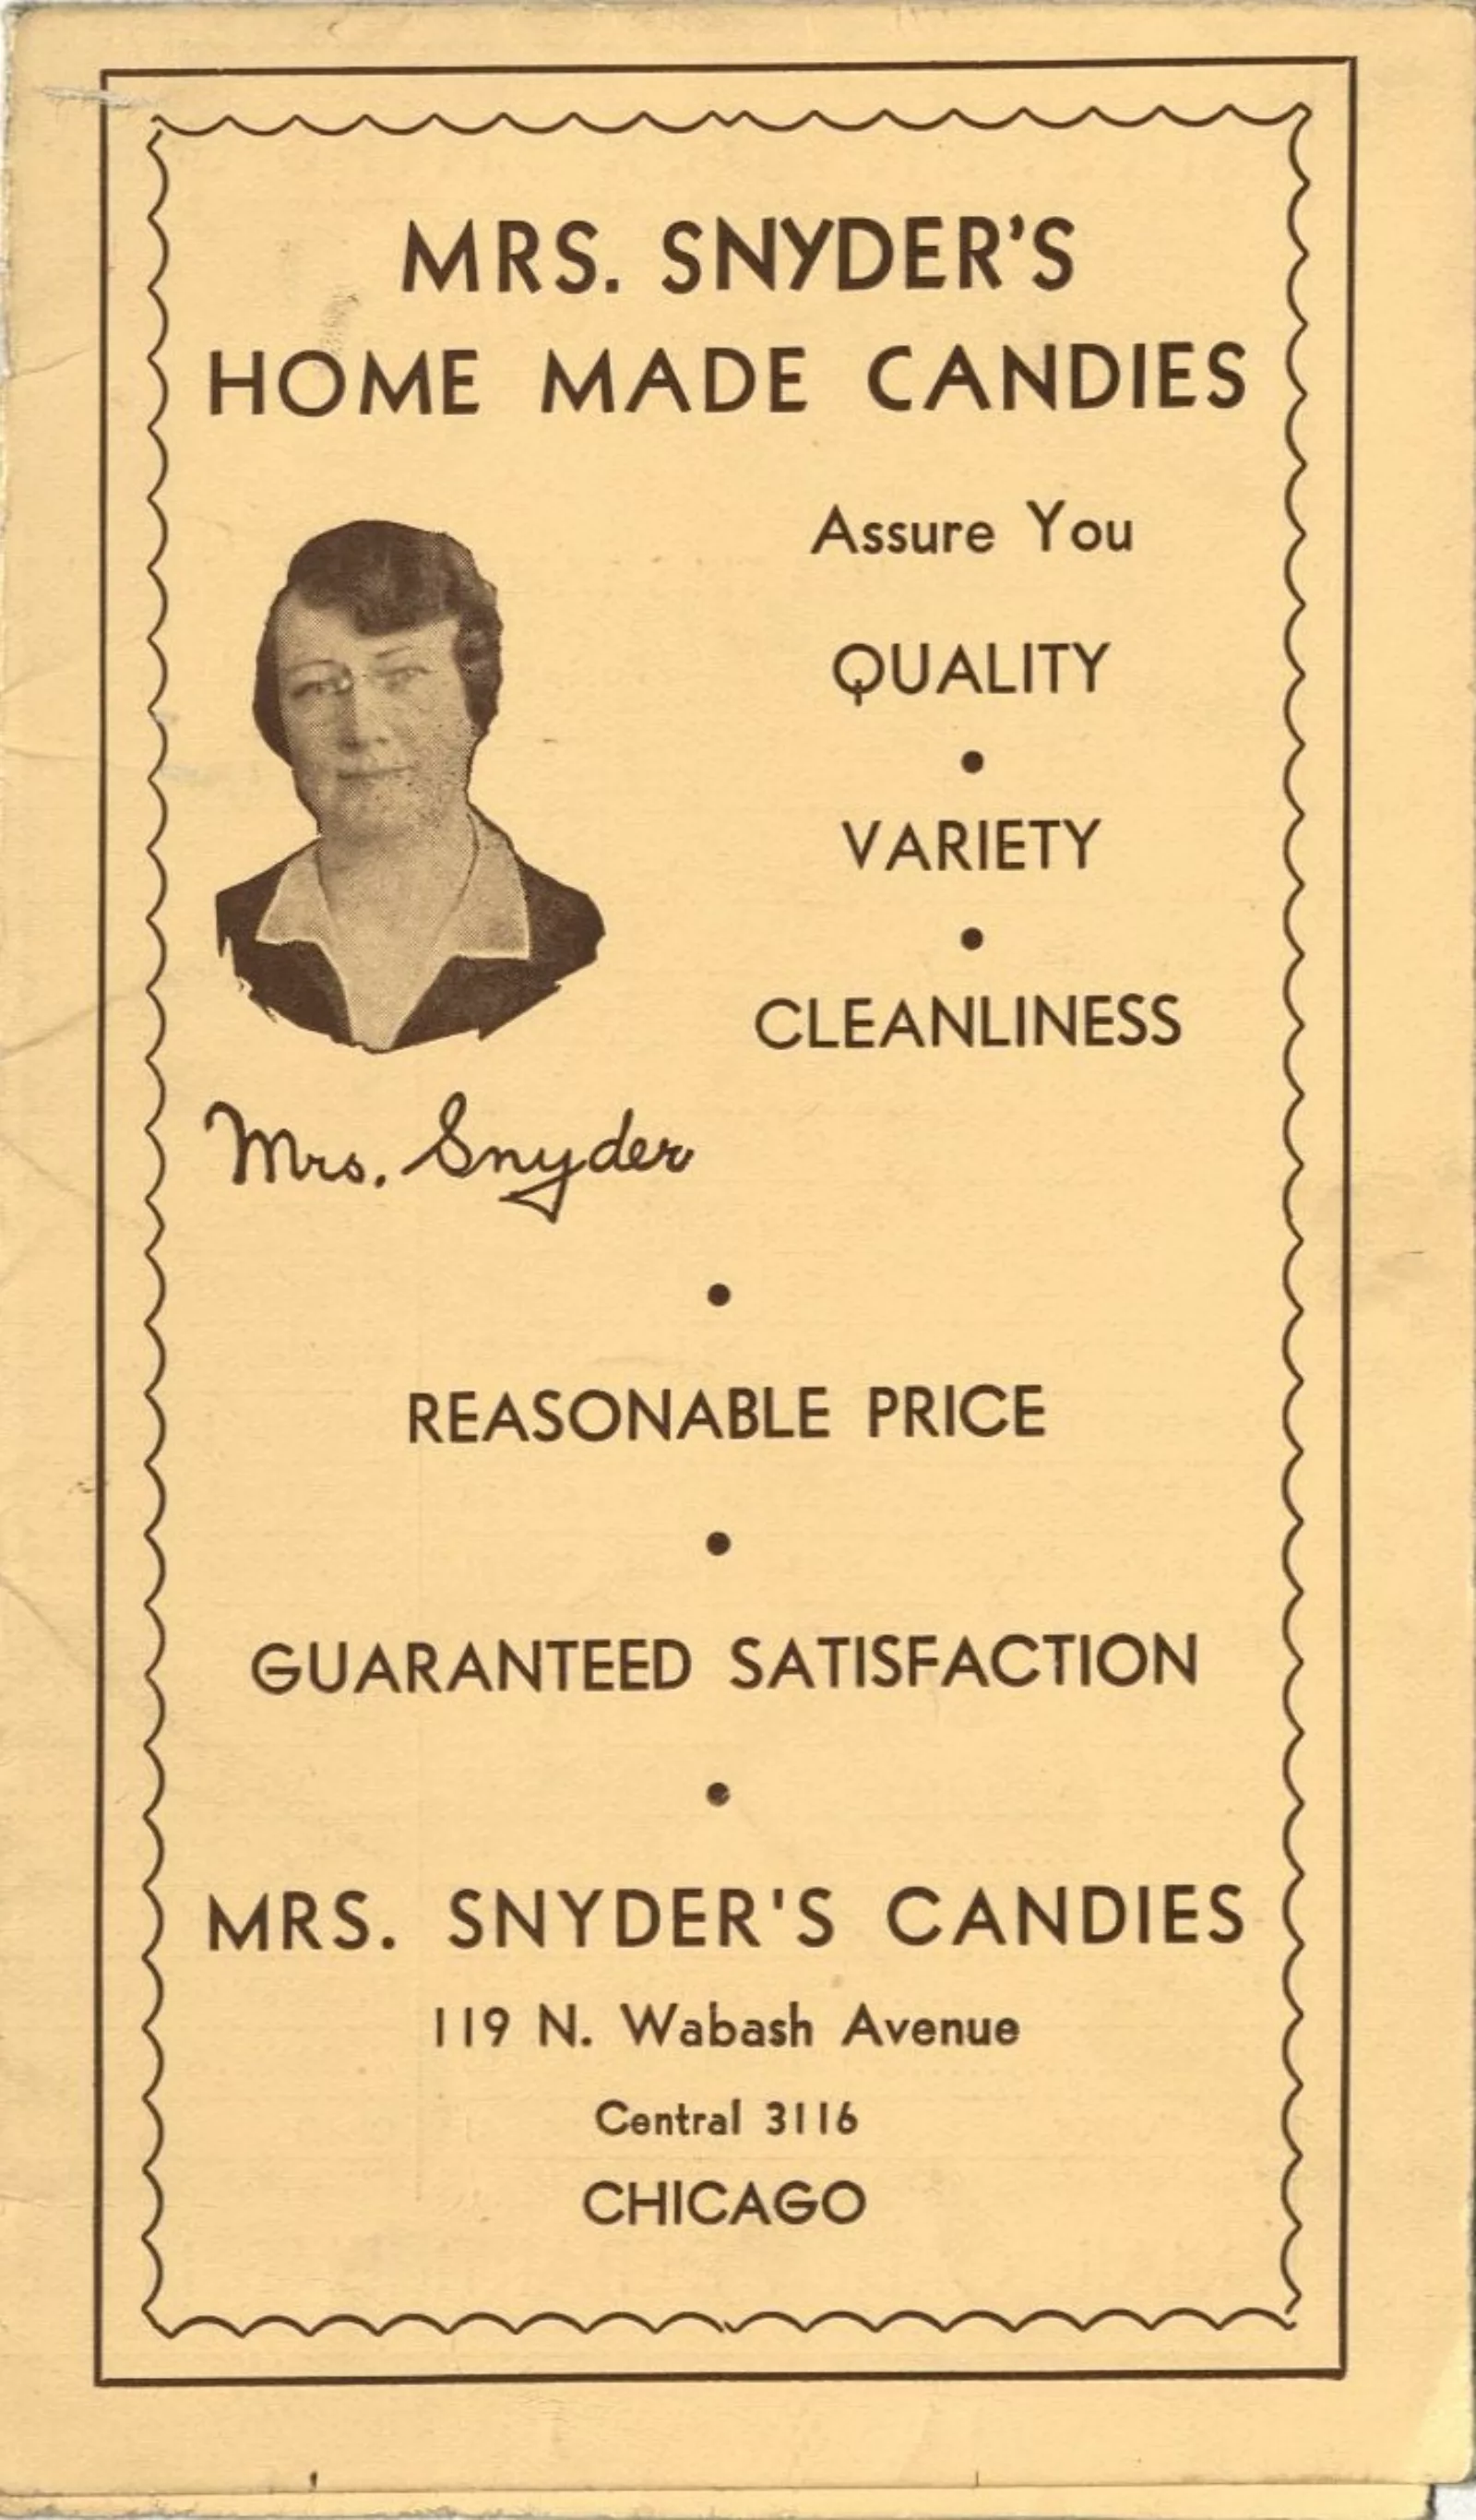 The front of a brochure features a portrait of Ora Snyder and the words "Mrs. Snyder's Home Made Candies" assure you quality, variety, and cleanliness."